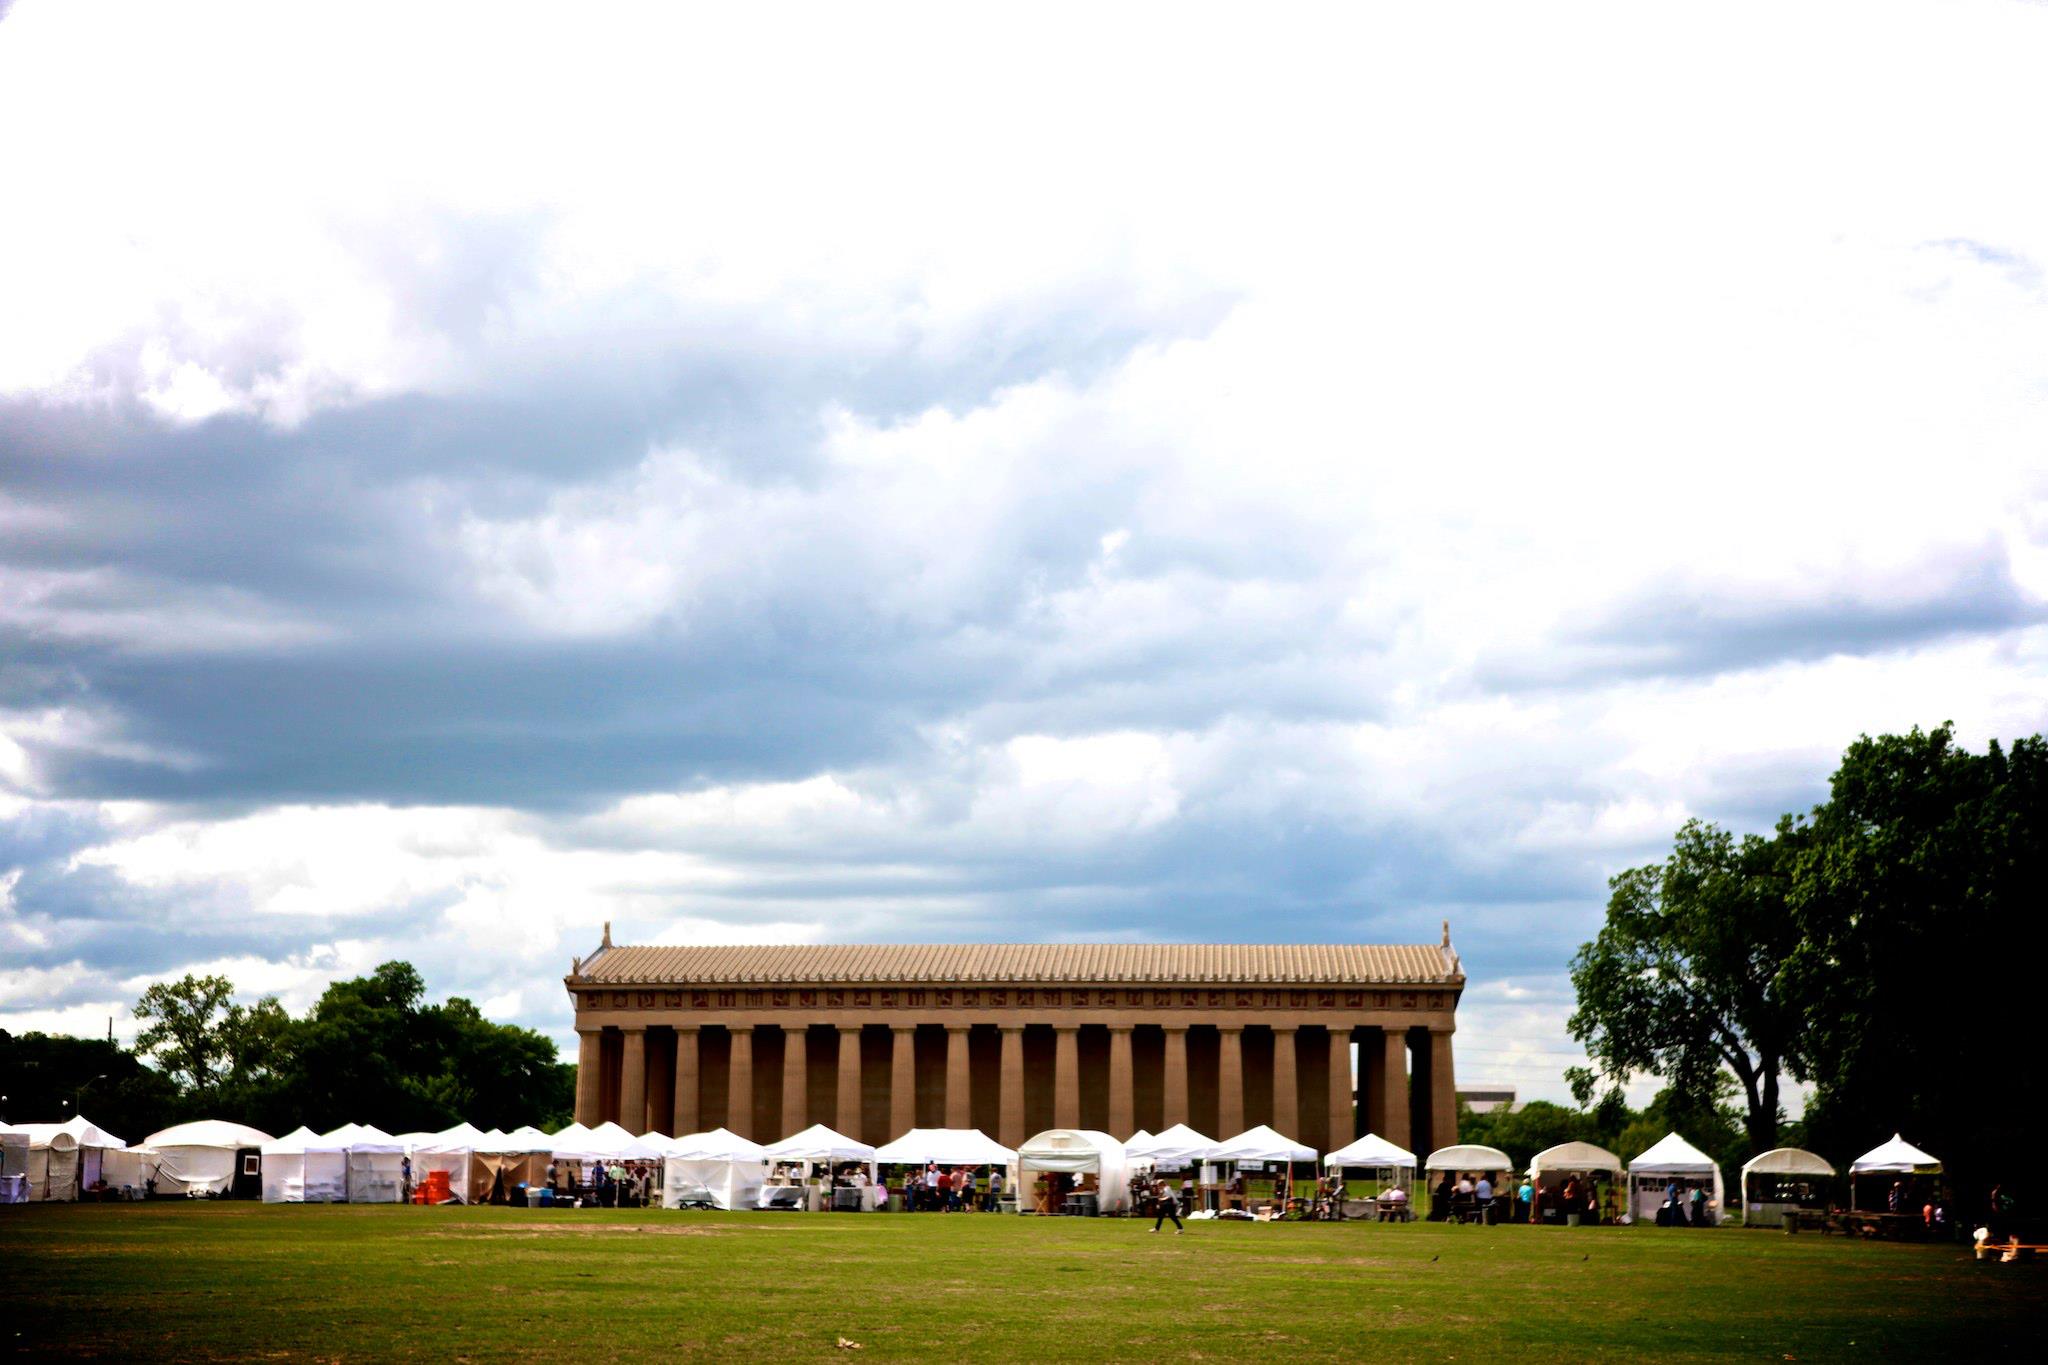 centennial park and craft fair vendors setup in front of the Nashville parthenon as a fun thing to do in Nashville in october